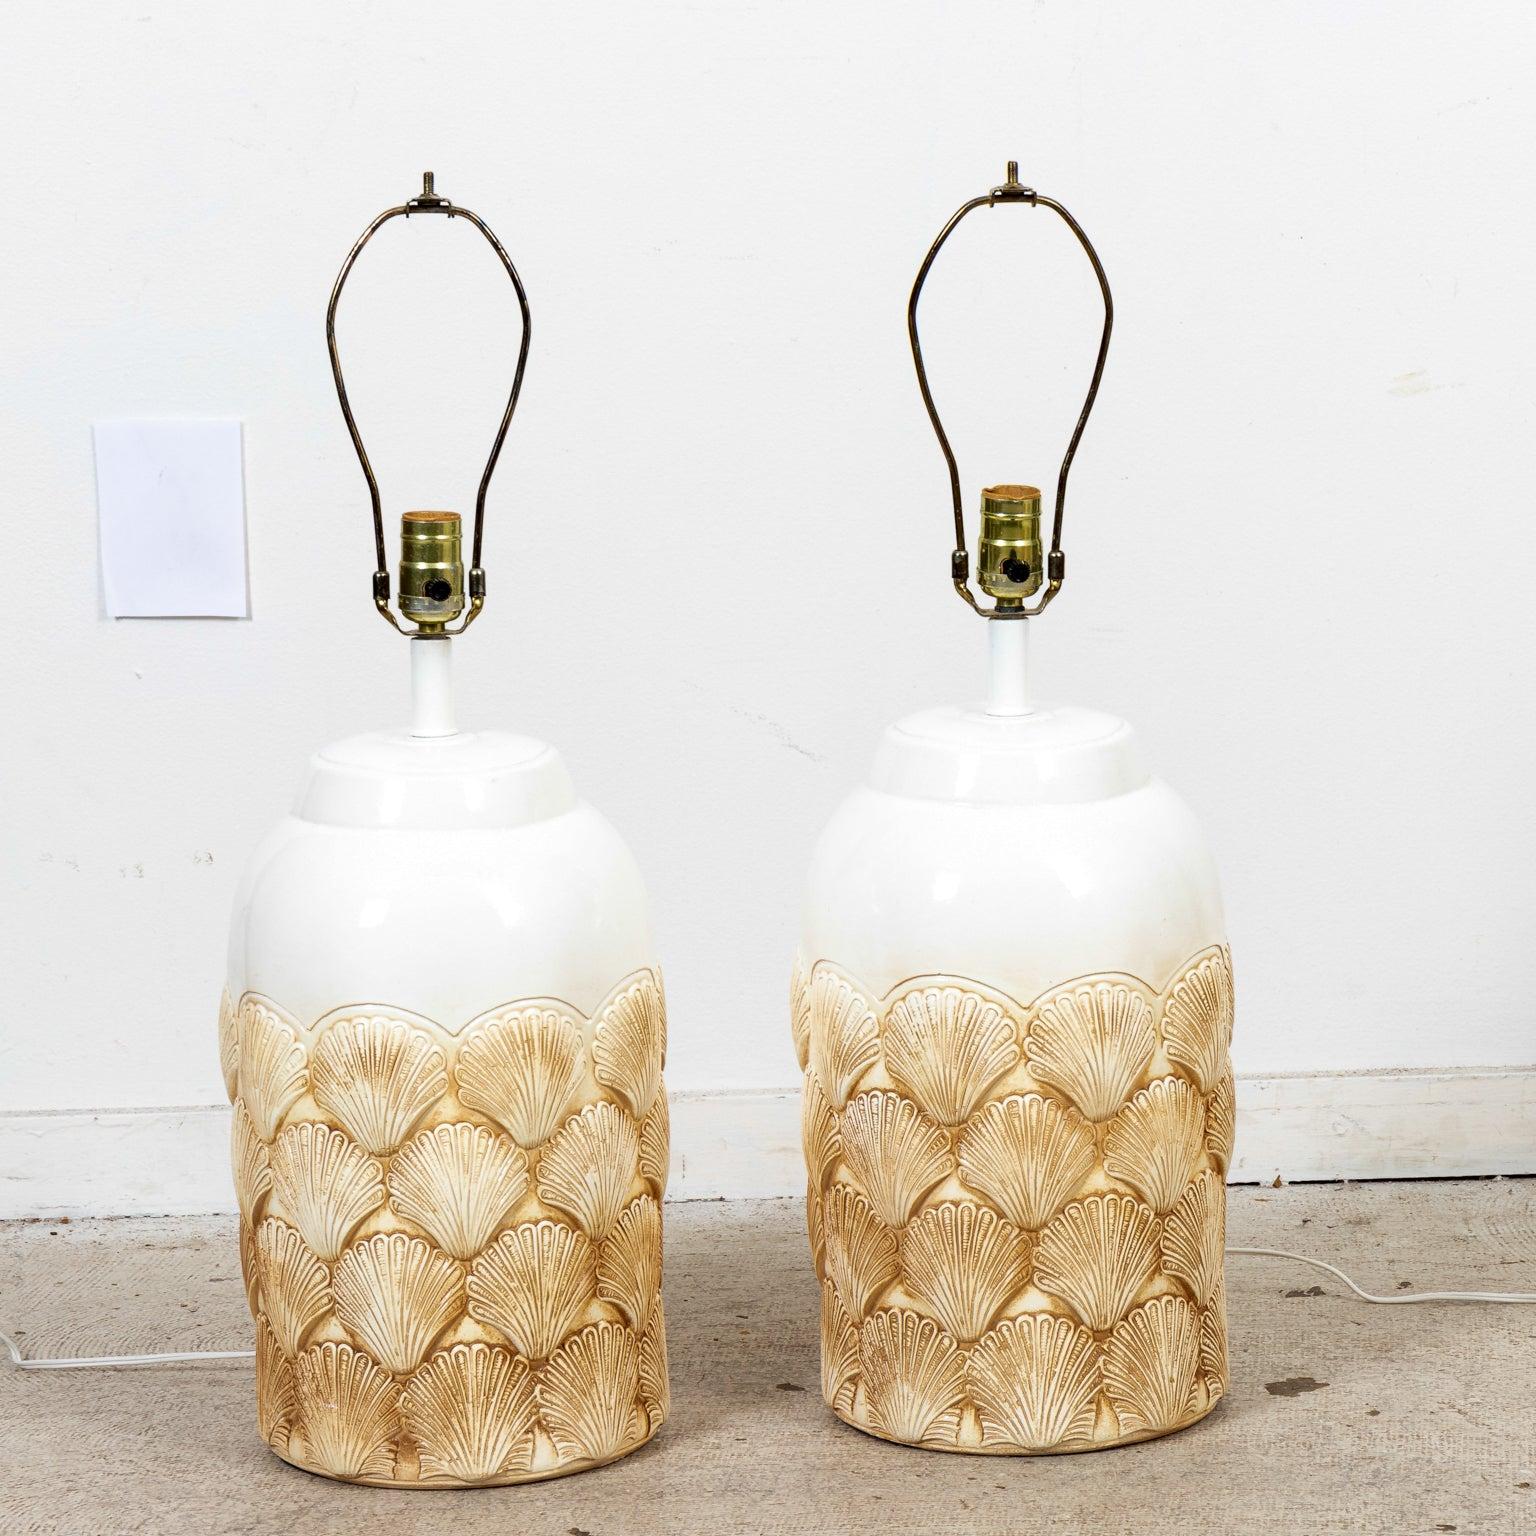 Pair of white painted table lamps with layered clam shells motifs and metal hardware. Please note of wear consistent with age including minor chips and finish loss. Shades not included.
  